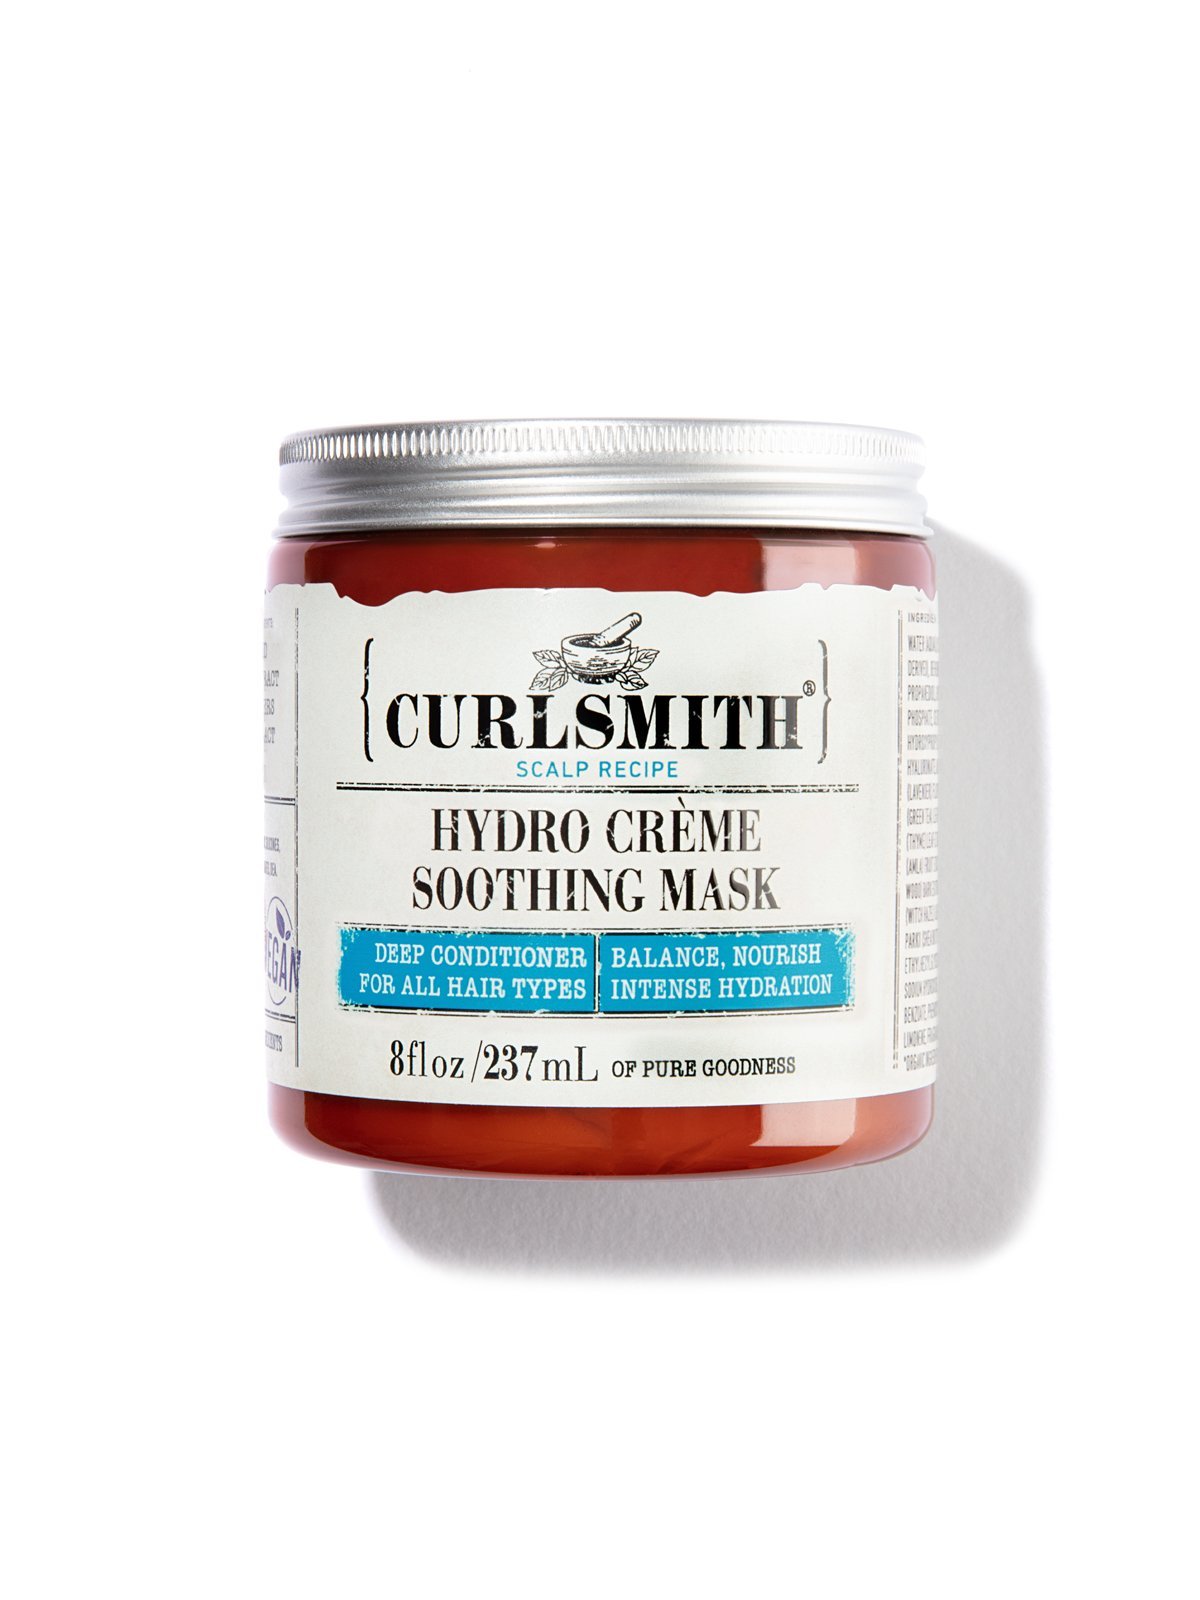 Curlsmith Hydro Creme Soothing Mask 237ml